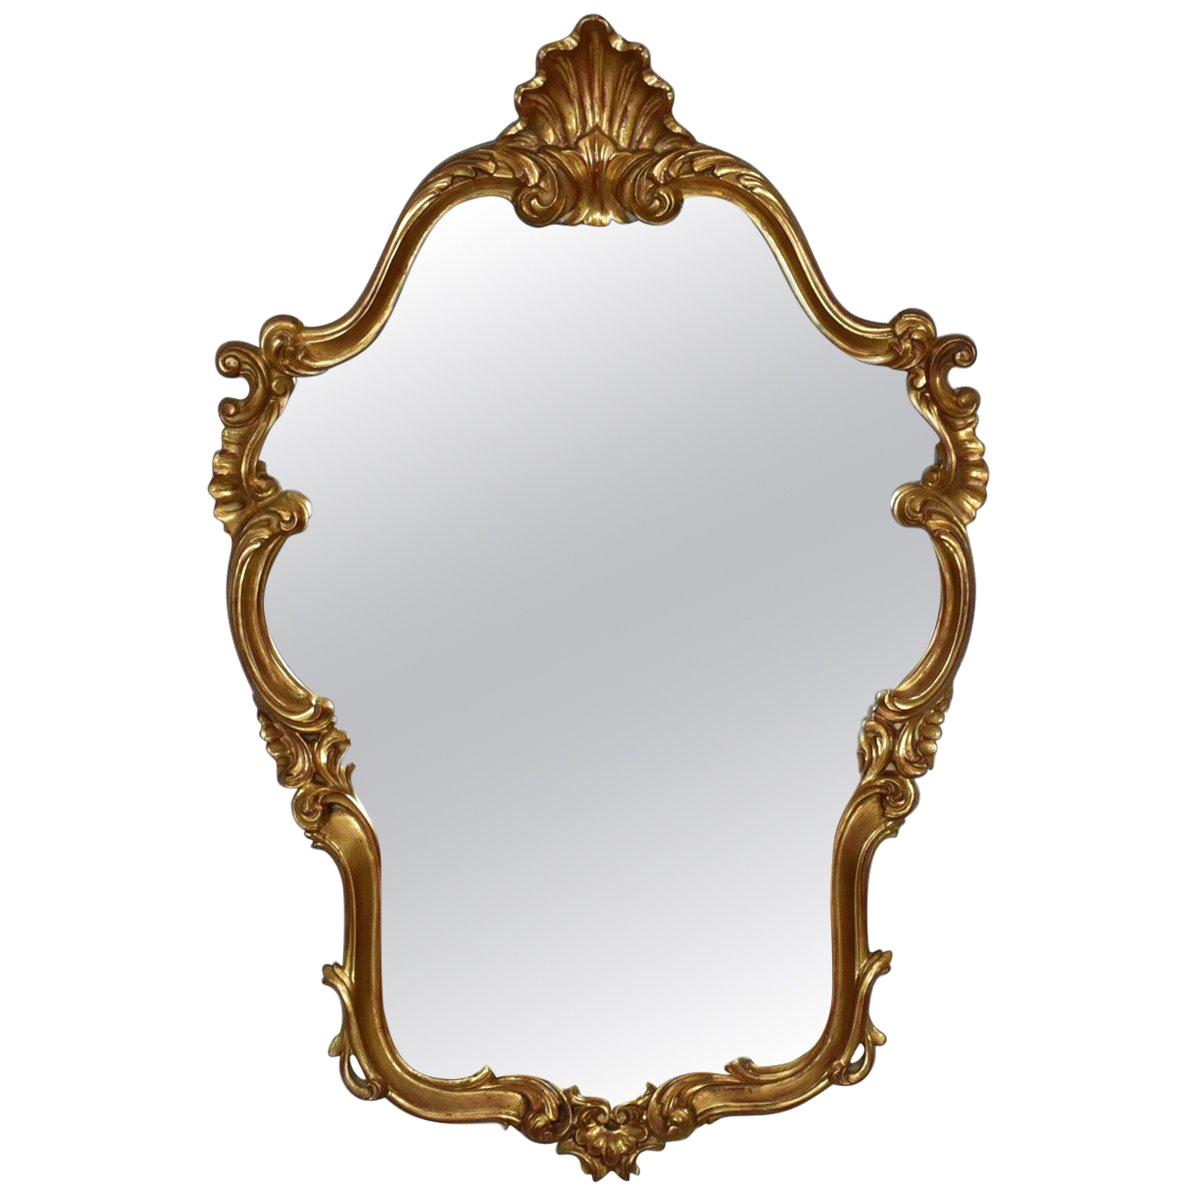 Vintage Wall Mirror, Victorian Rococo Revival Manner, English, Late 20th Century